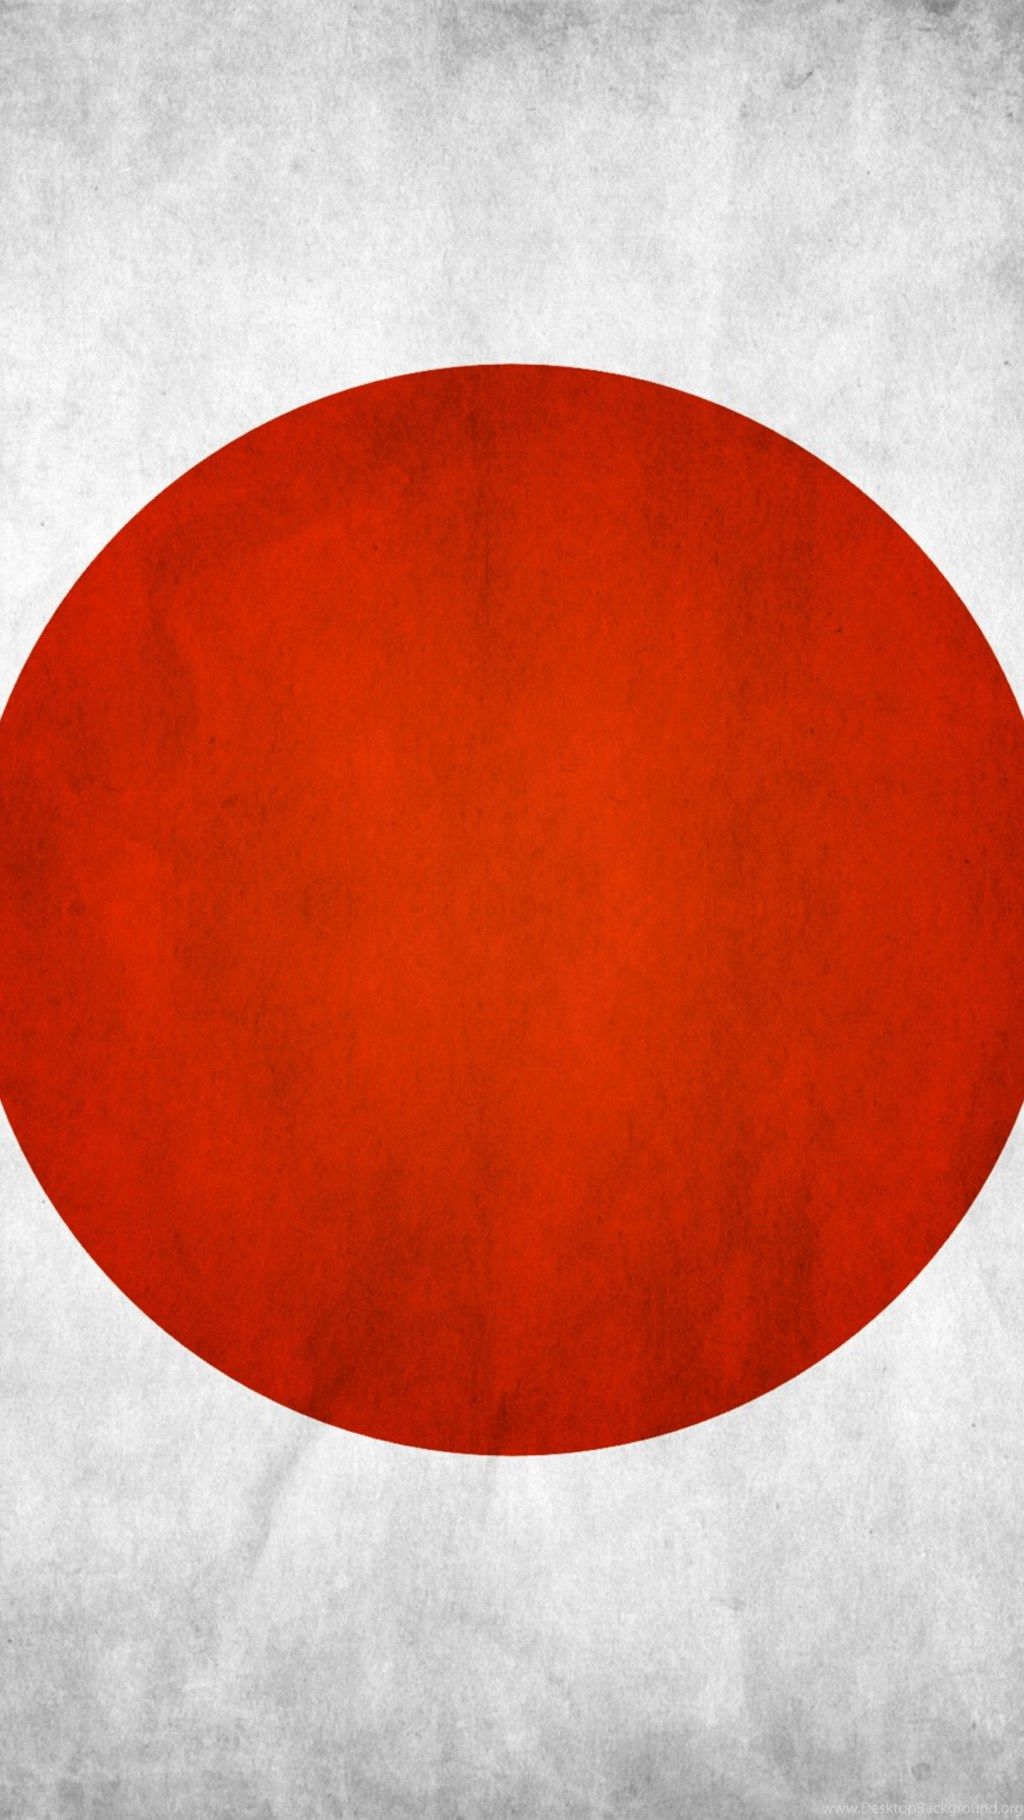 Japanese Flag Wallpapers